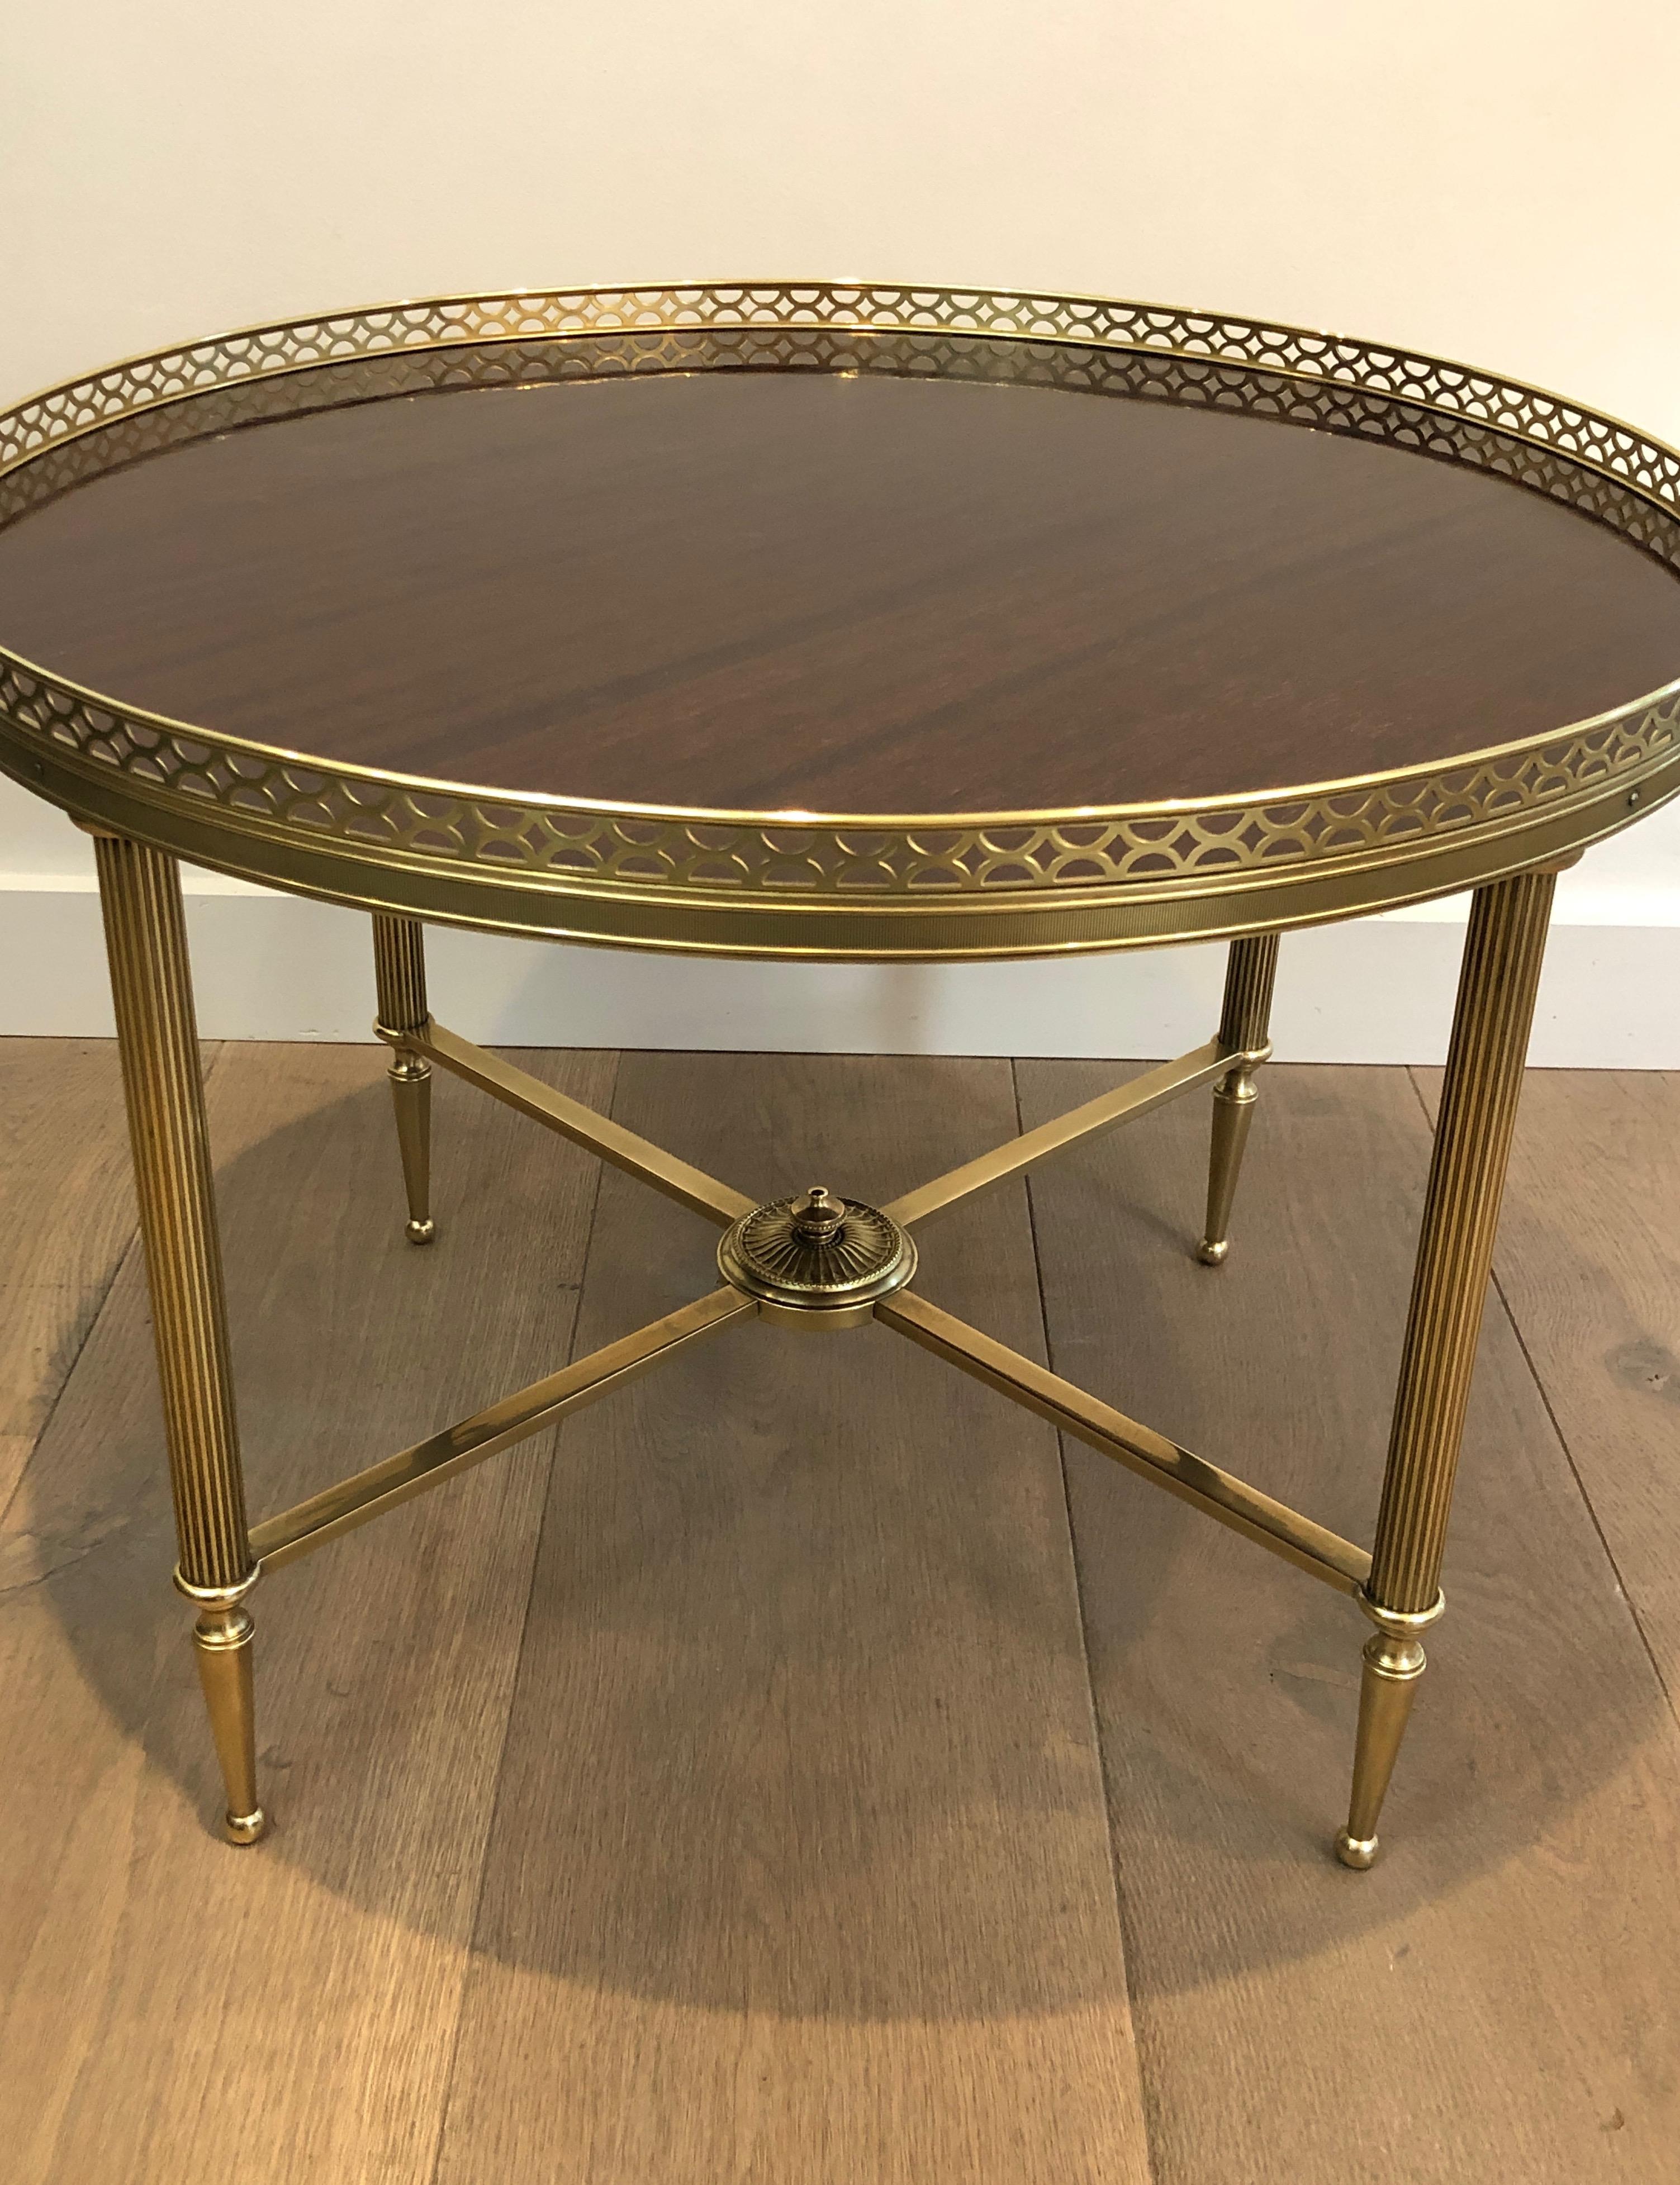 Maison Jansen, Neoclassical Brass Round Coffee Table with Mahogany Veneer Top F 6